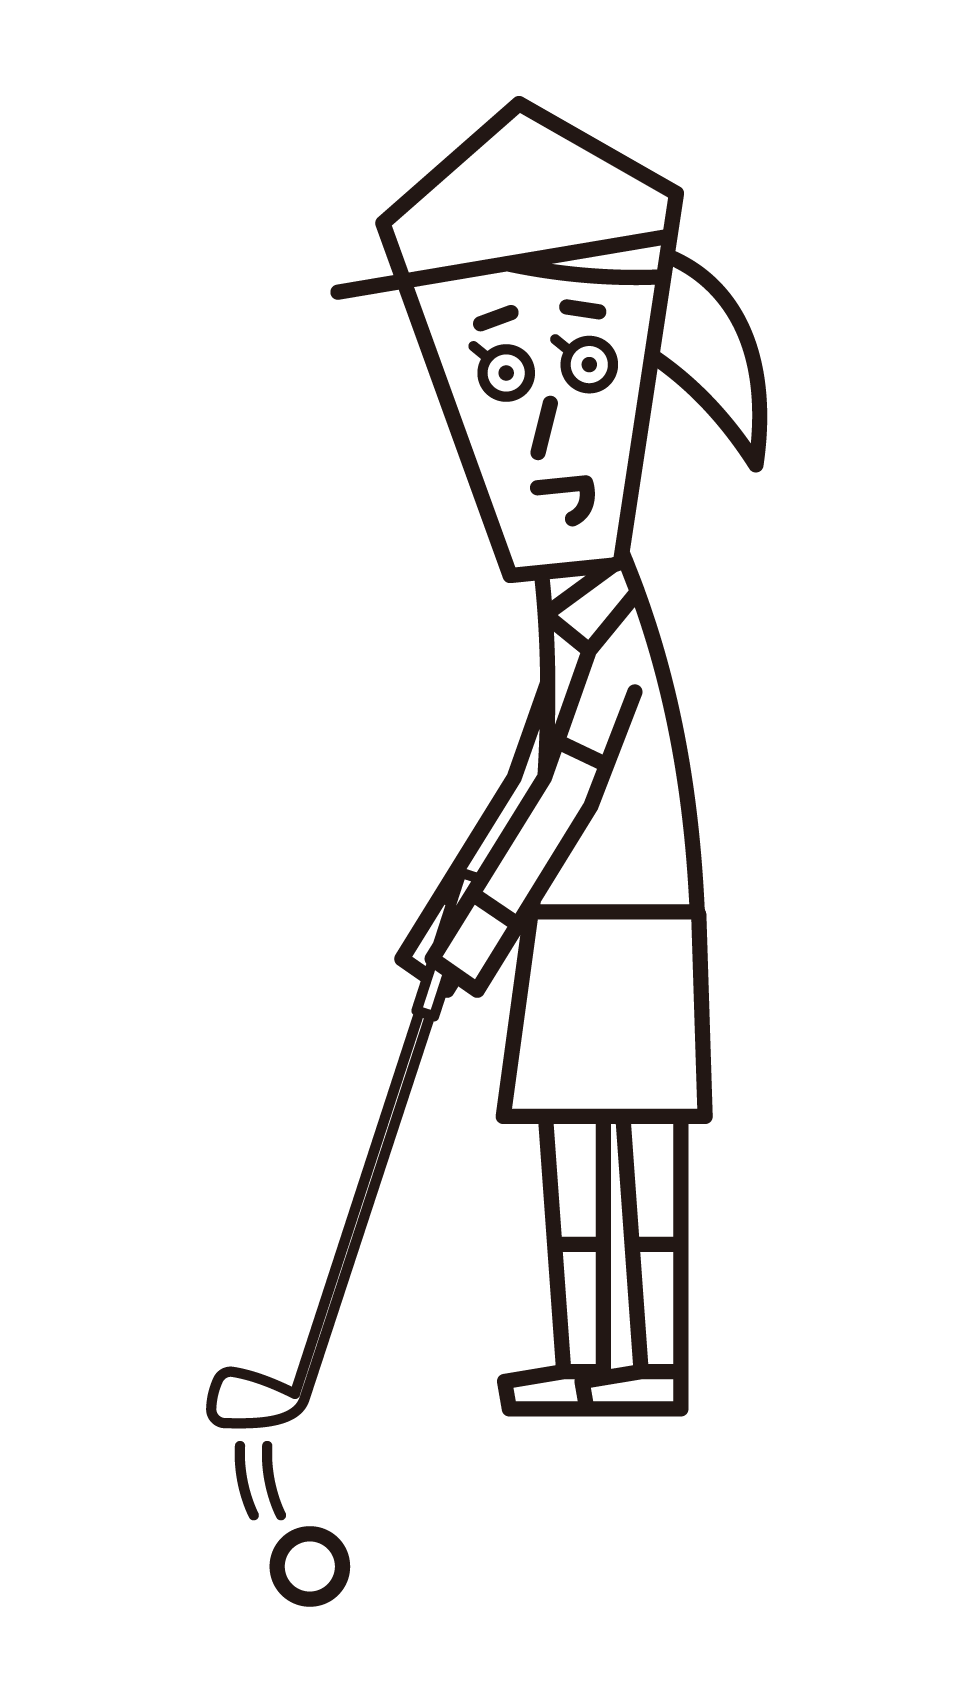 Illustration of a woman who hits a putter in golf